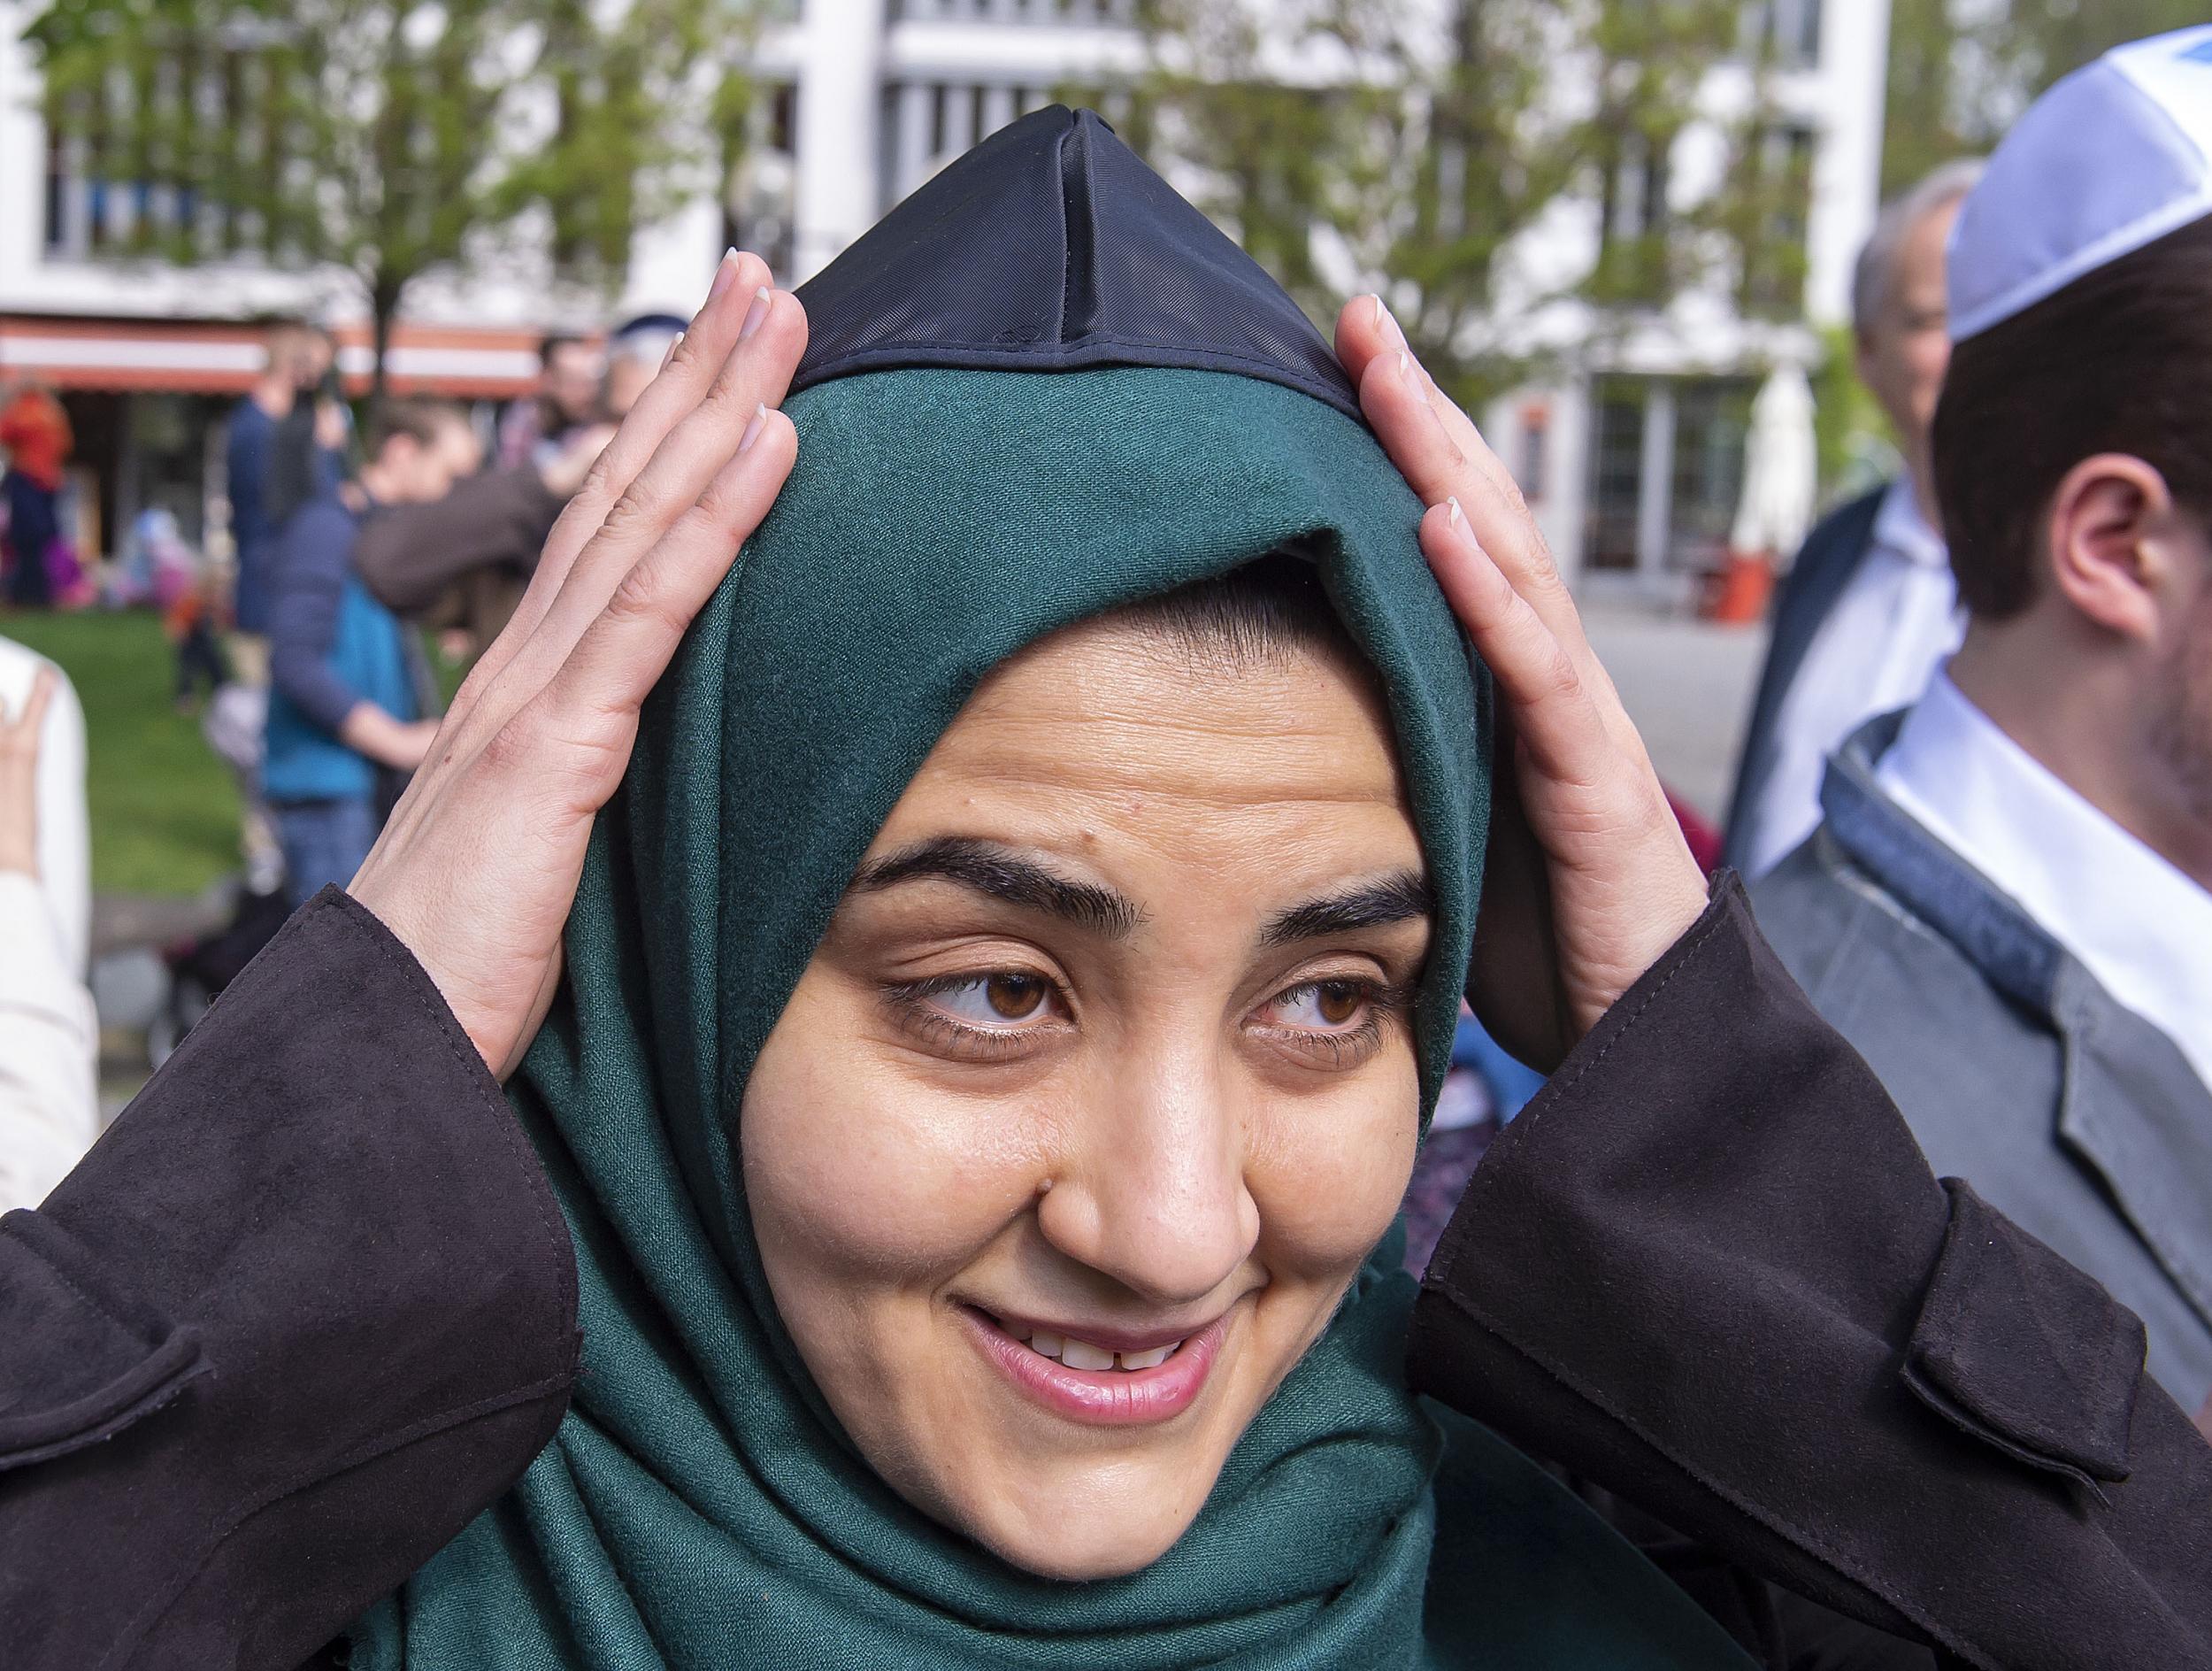 Iman Jamous wears the kippah during a demonstration against antisemitism in Erfurt, Germany